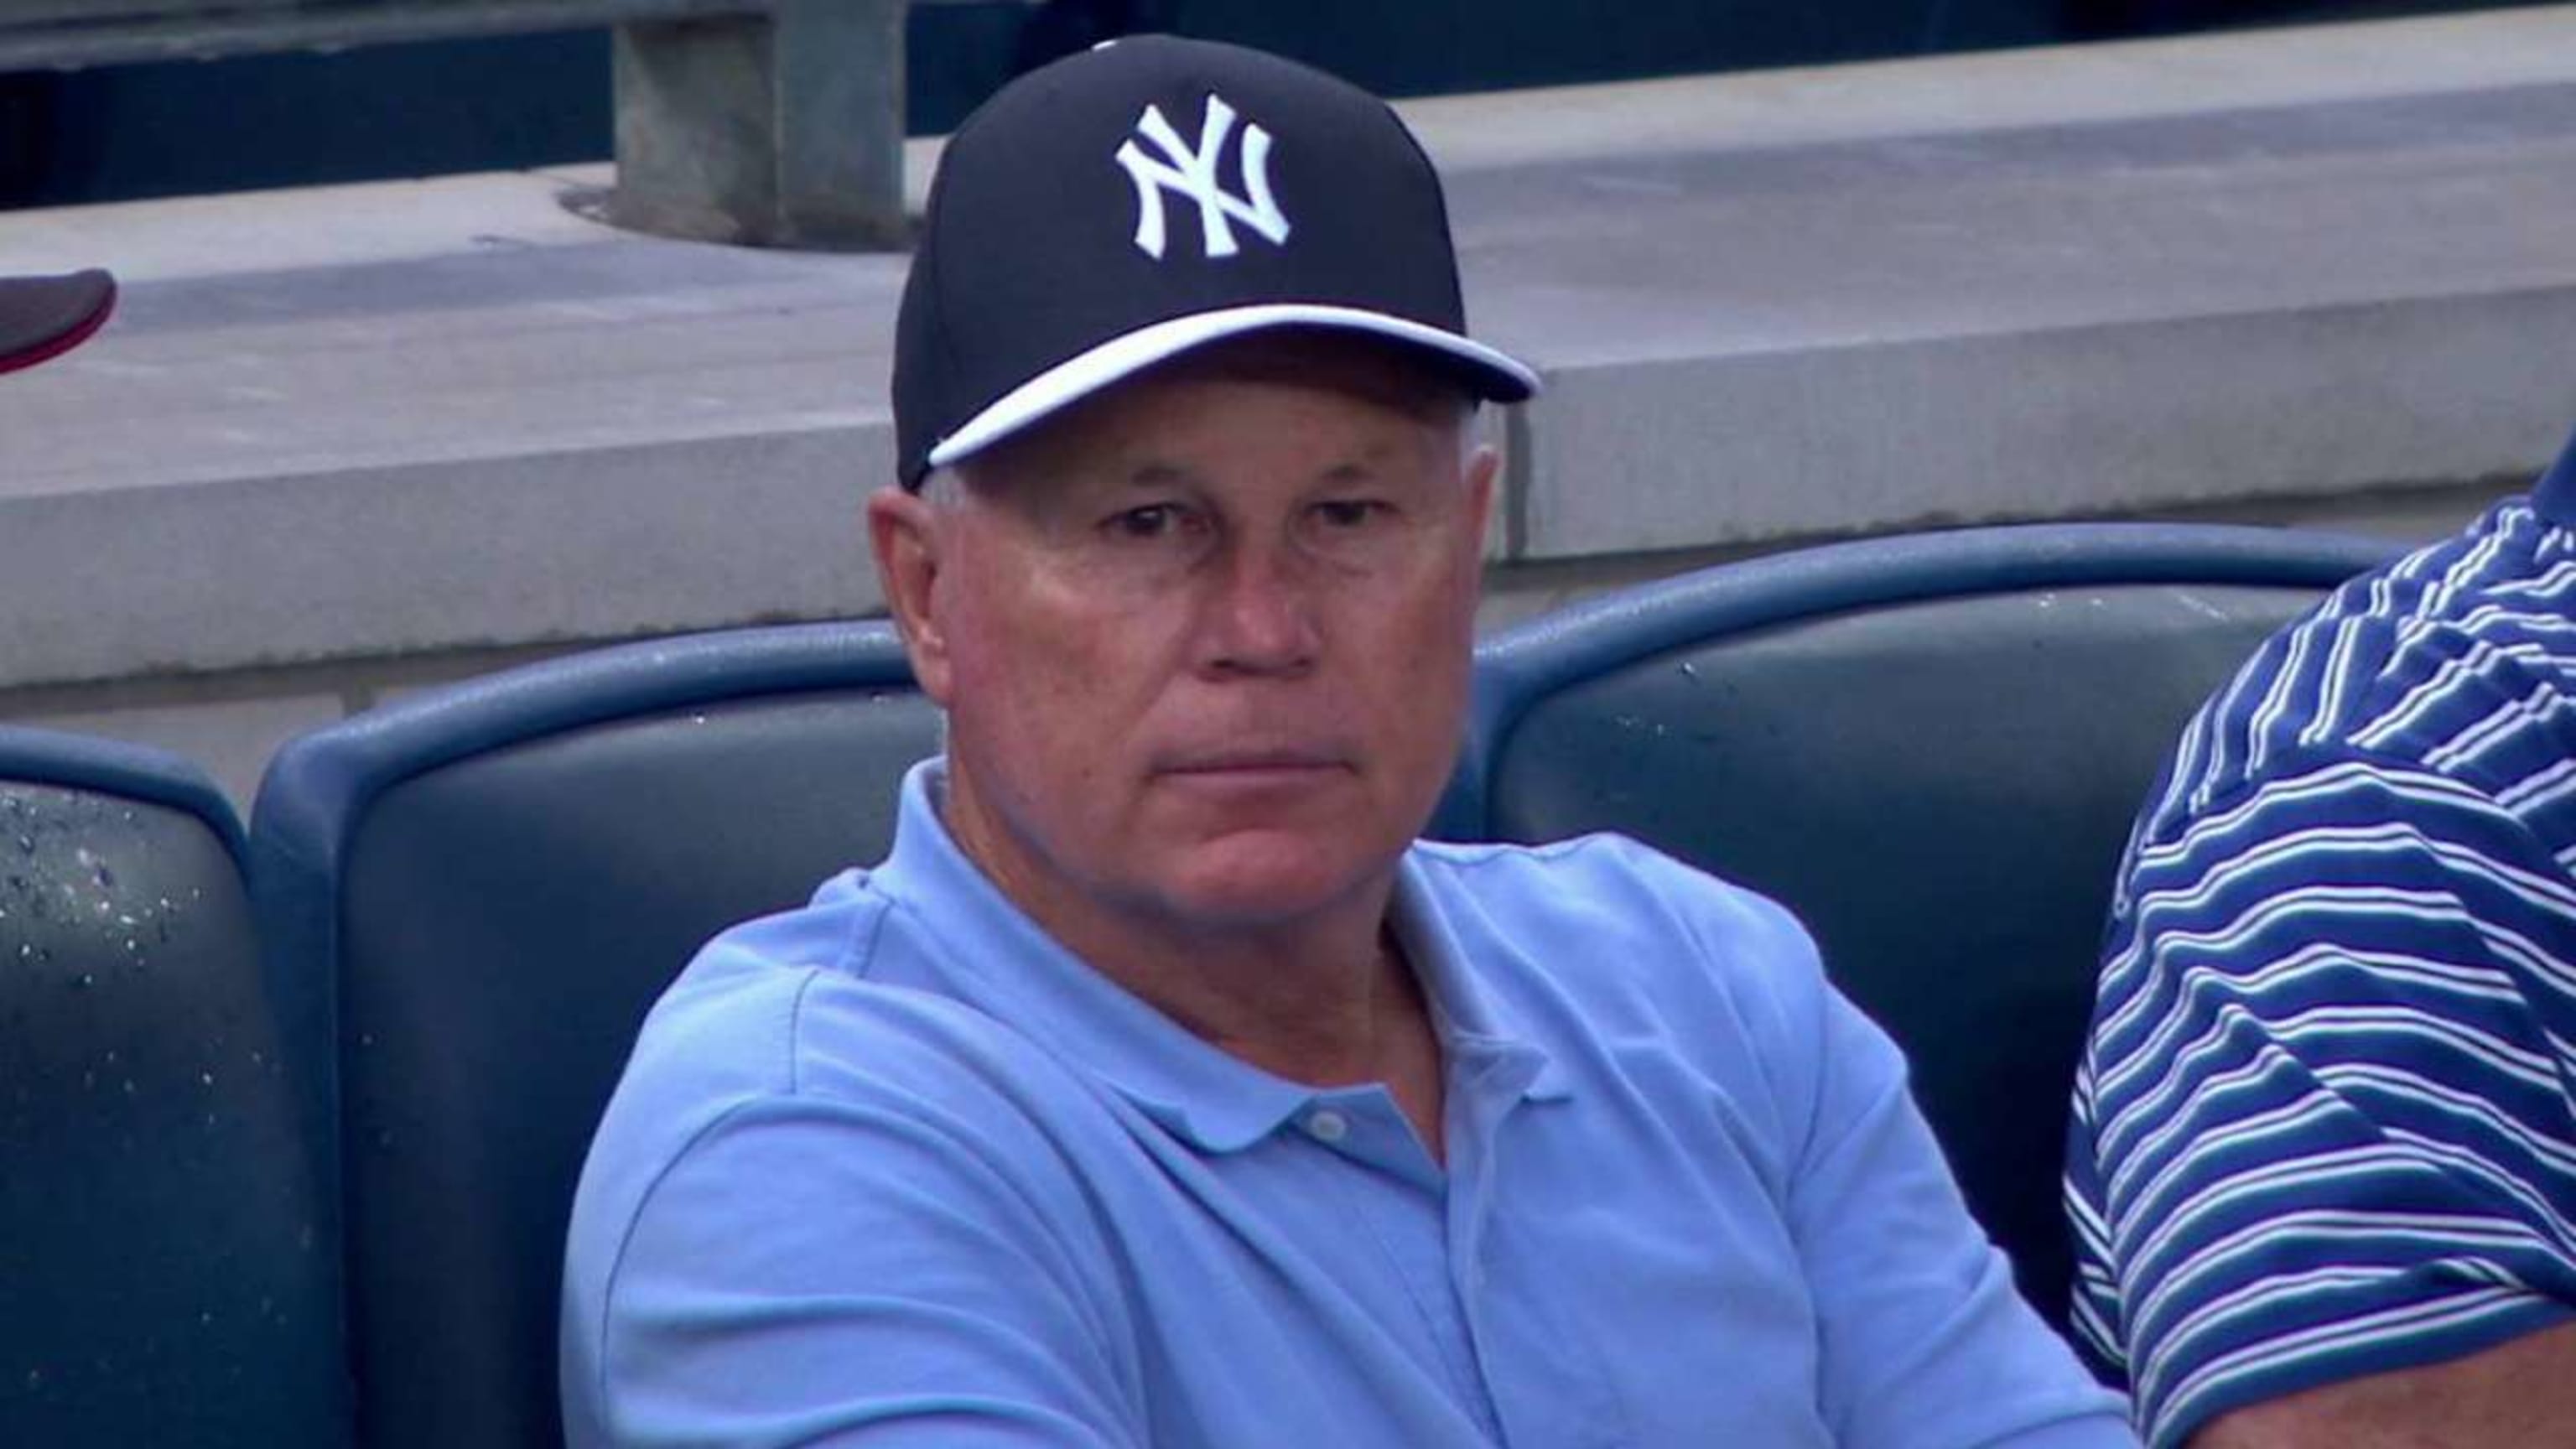 Perfect son Brett Gardner tossed a foul ball to his dad in the stands at  Yankee Stadium